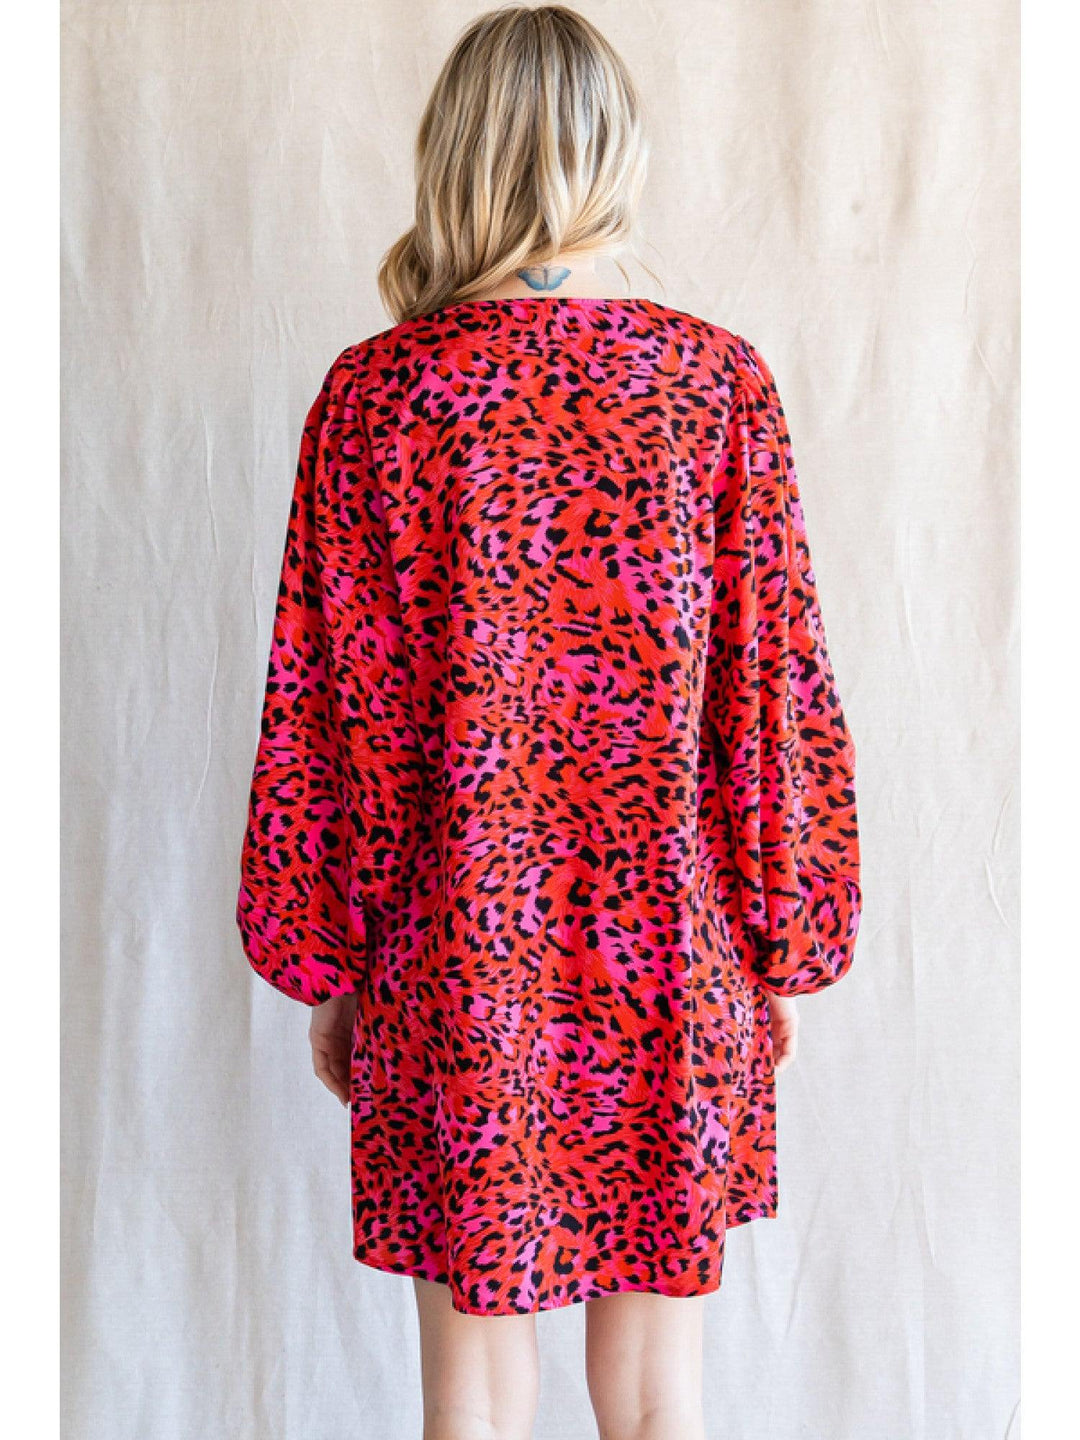 Red and Pink Leopard Dress